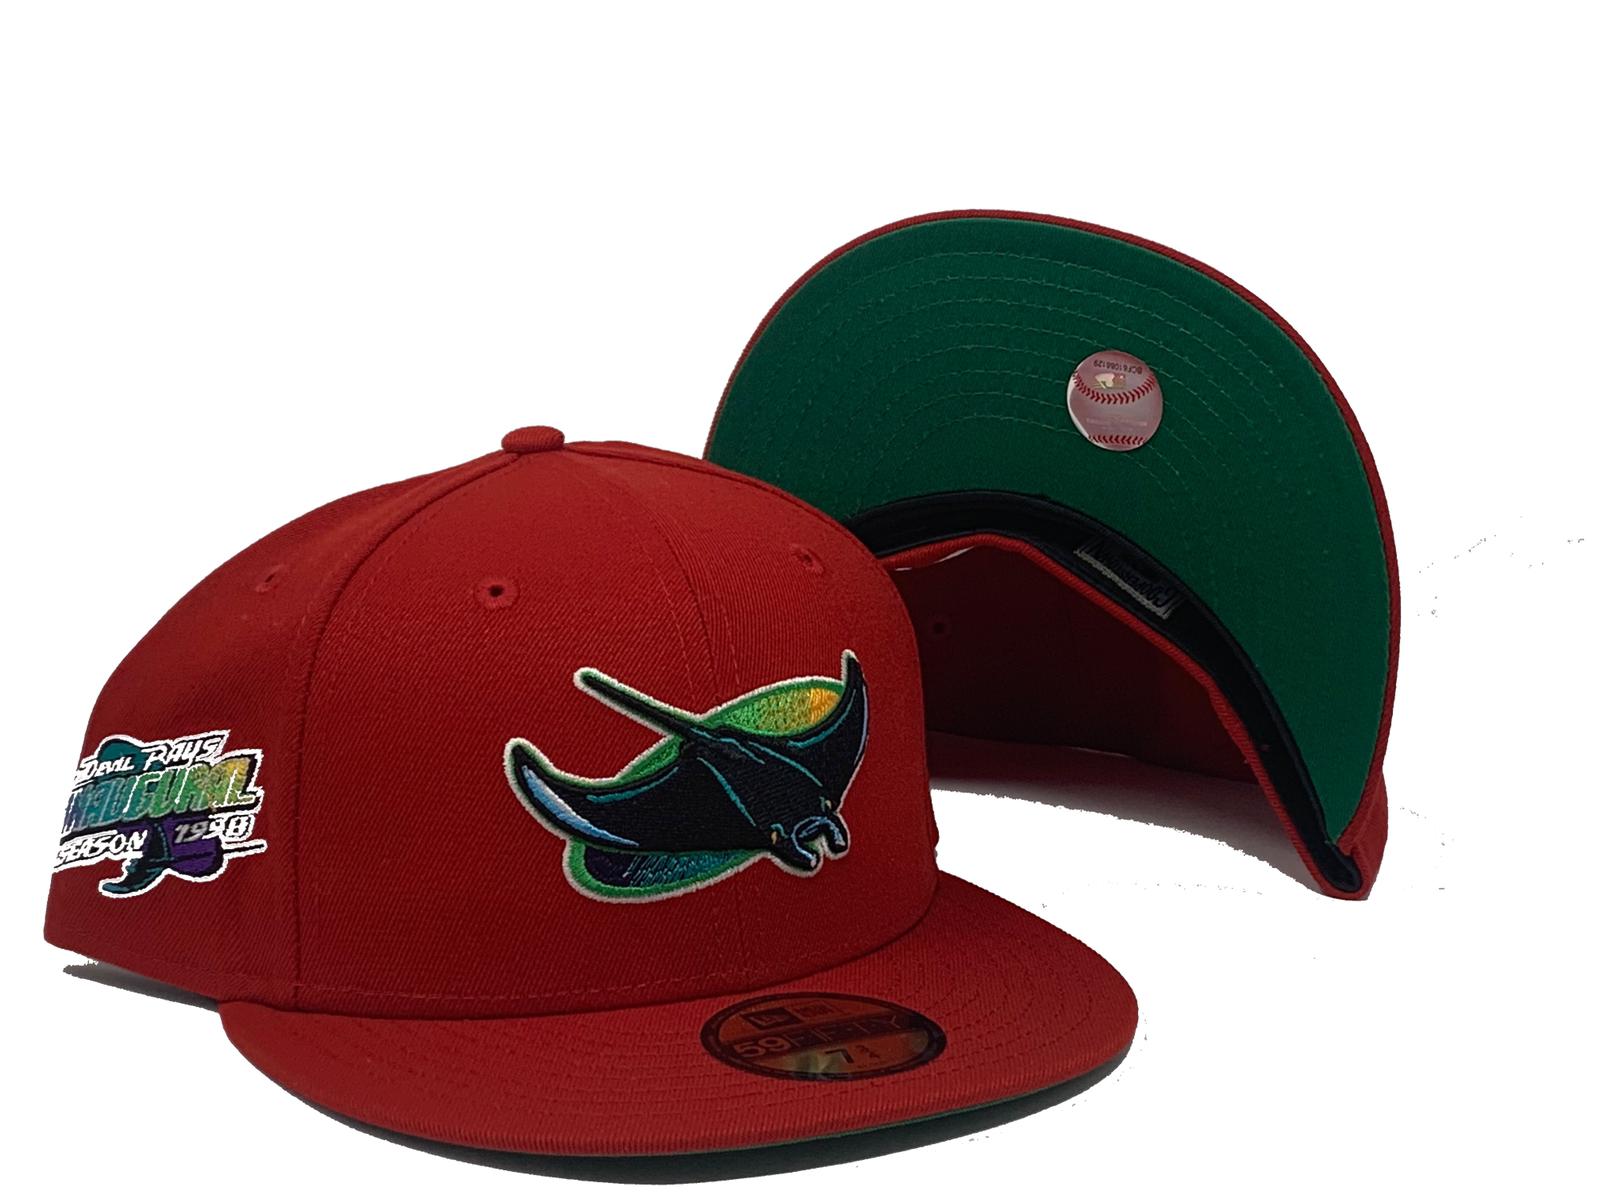 Tampa Bay Devil Rays 1998 Inaugural Season New Era 59Fifty Fitted